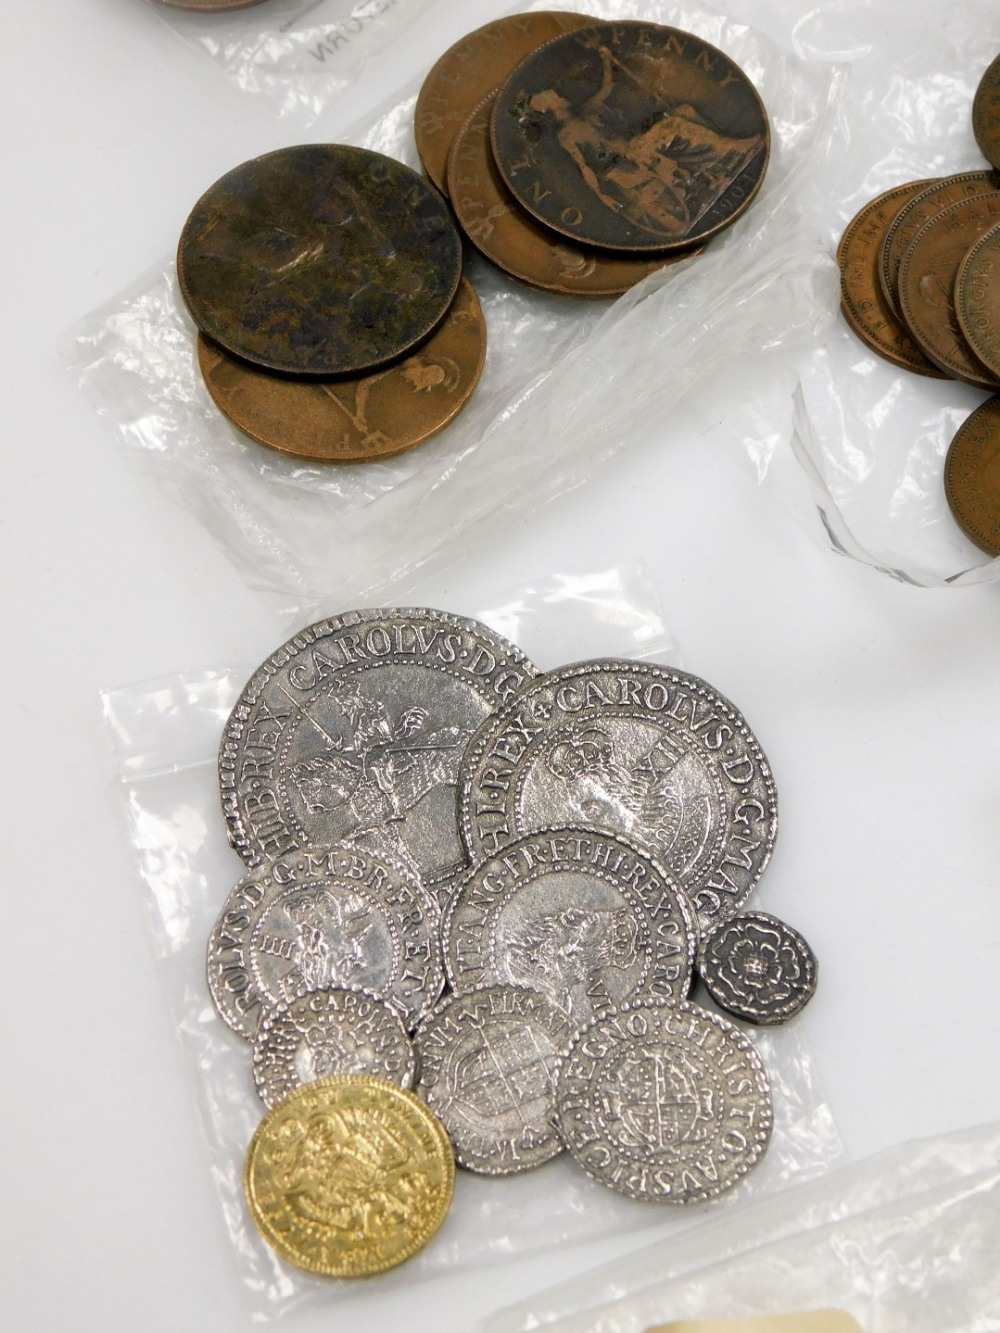 General coinage, to include museum replicas, foreign coins, British cupronickel, half pennies, etc. - Image 2 of 4